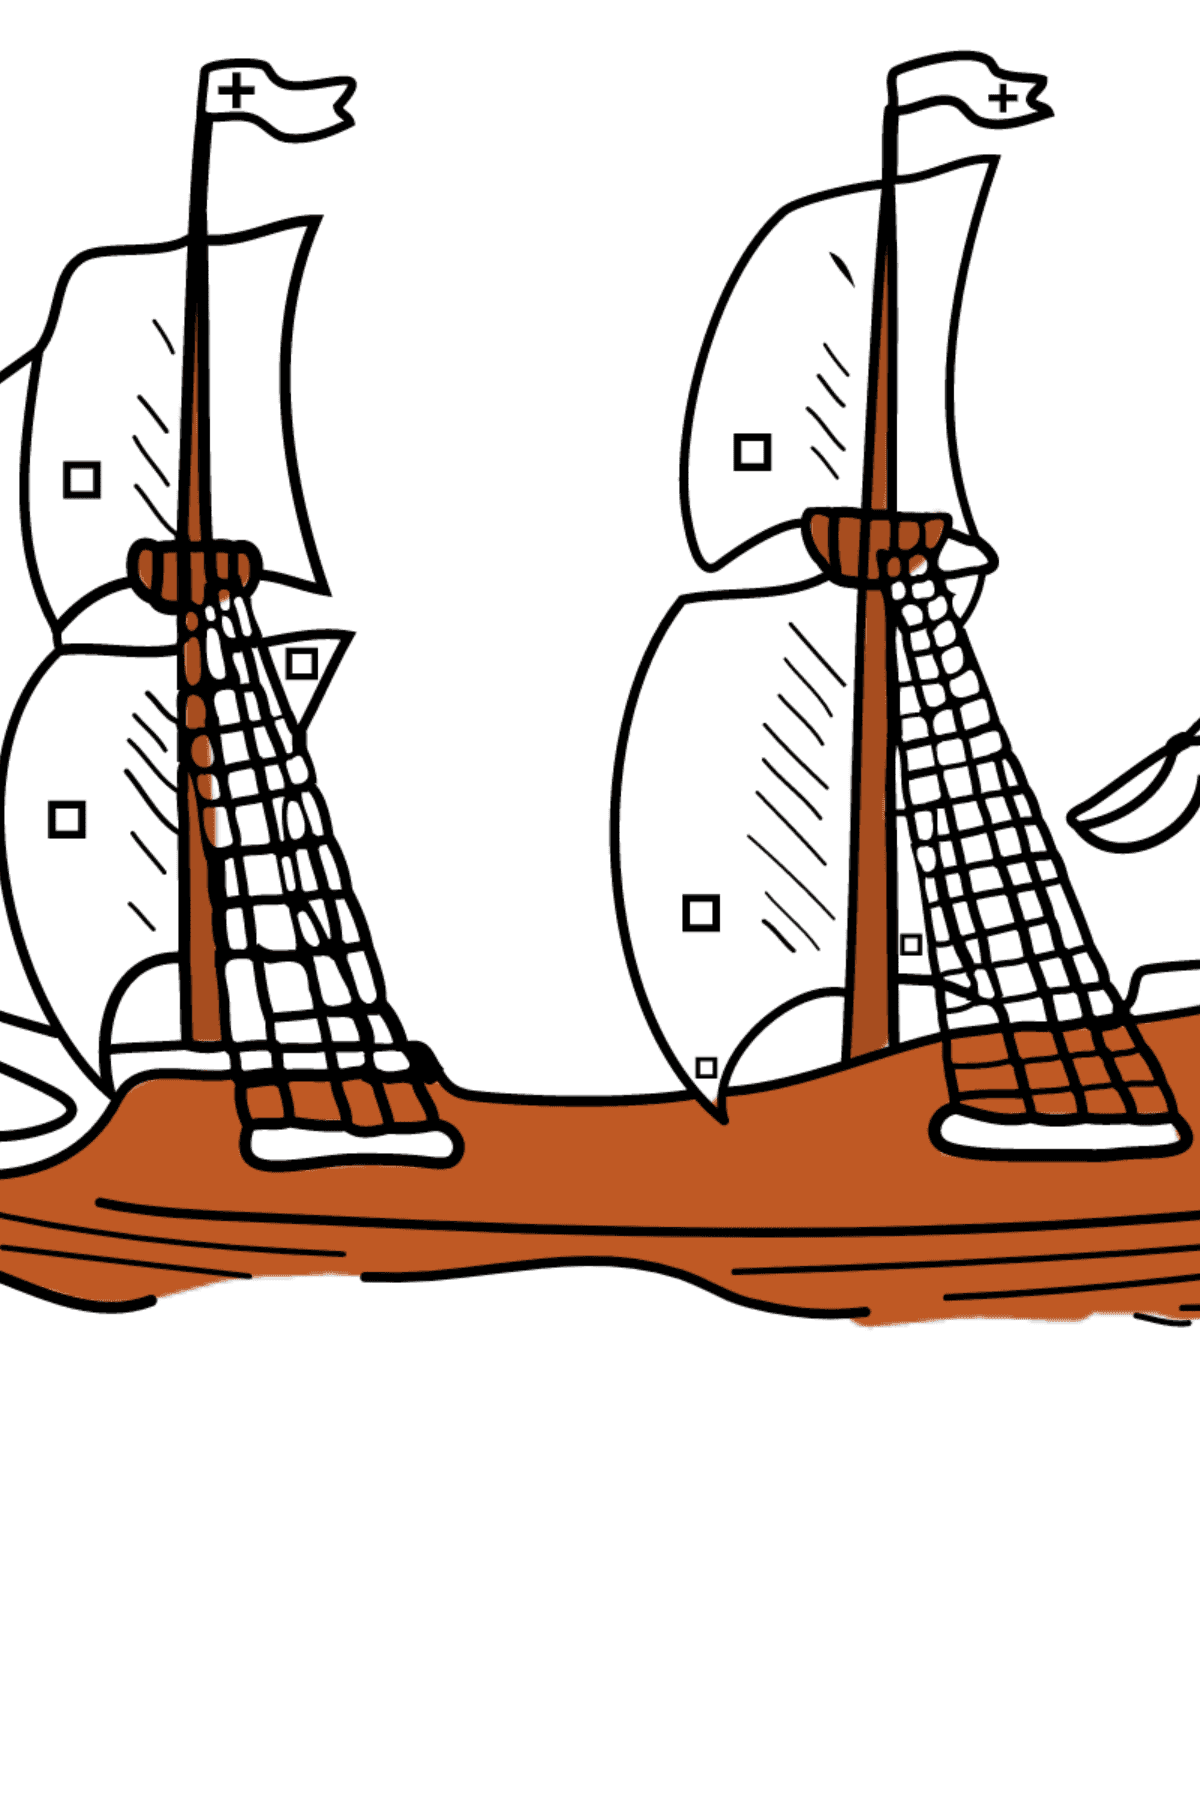 Coloring Page - A Galleon with Sails - Coloring by Symbols for Children